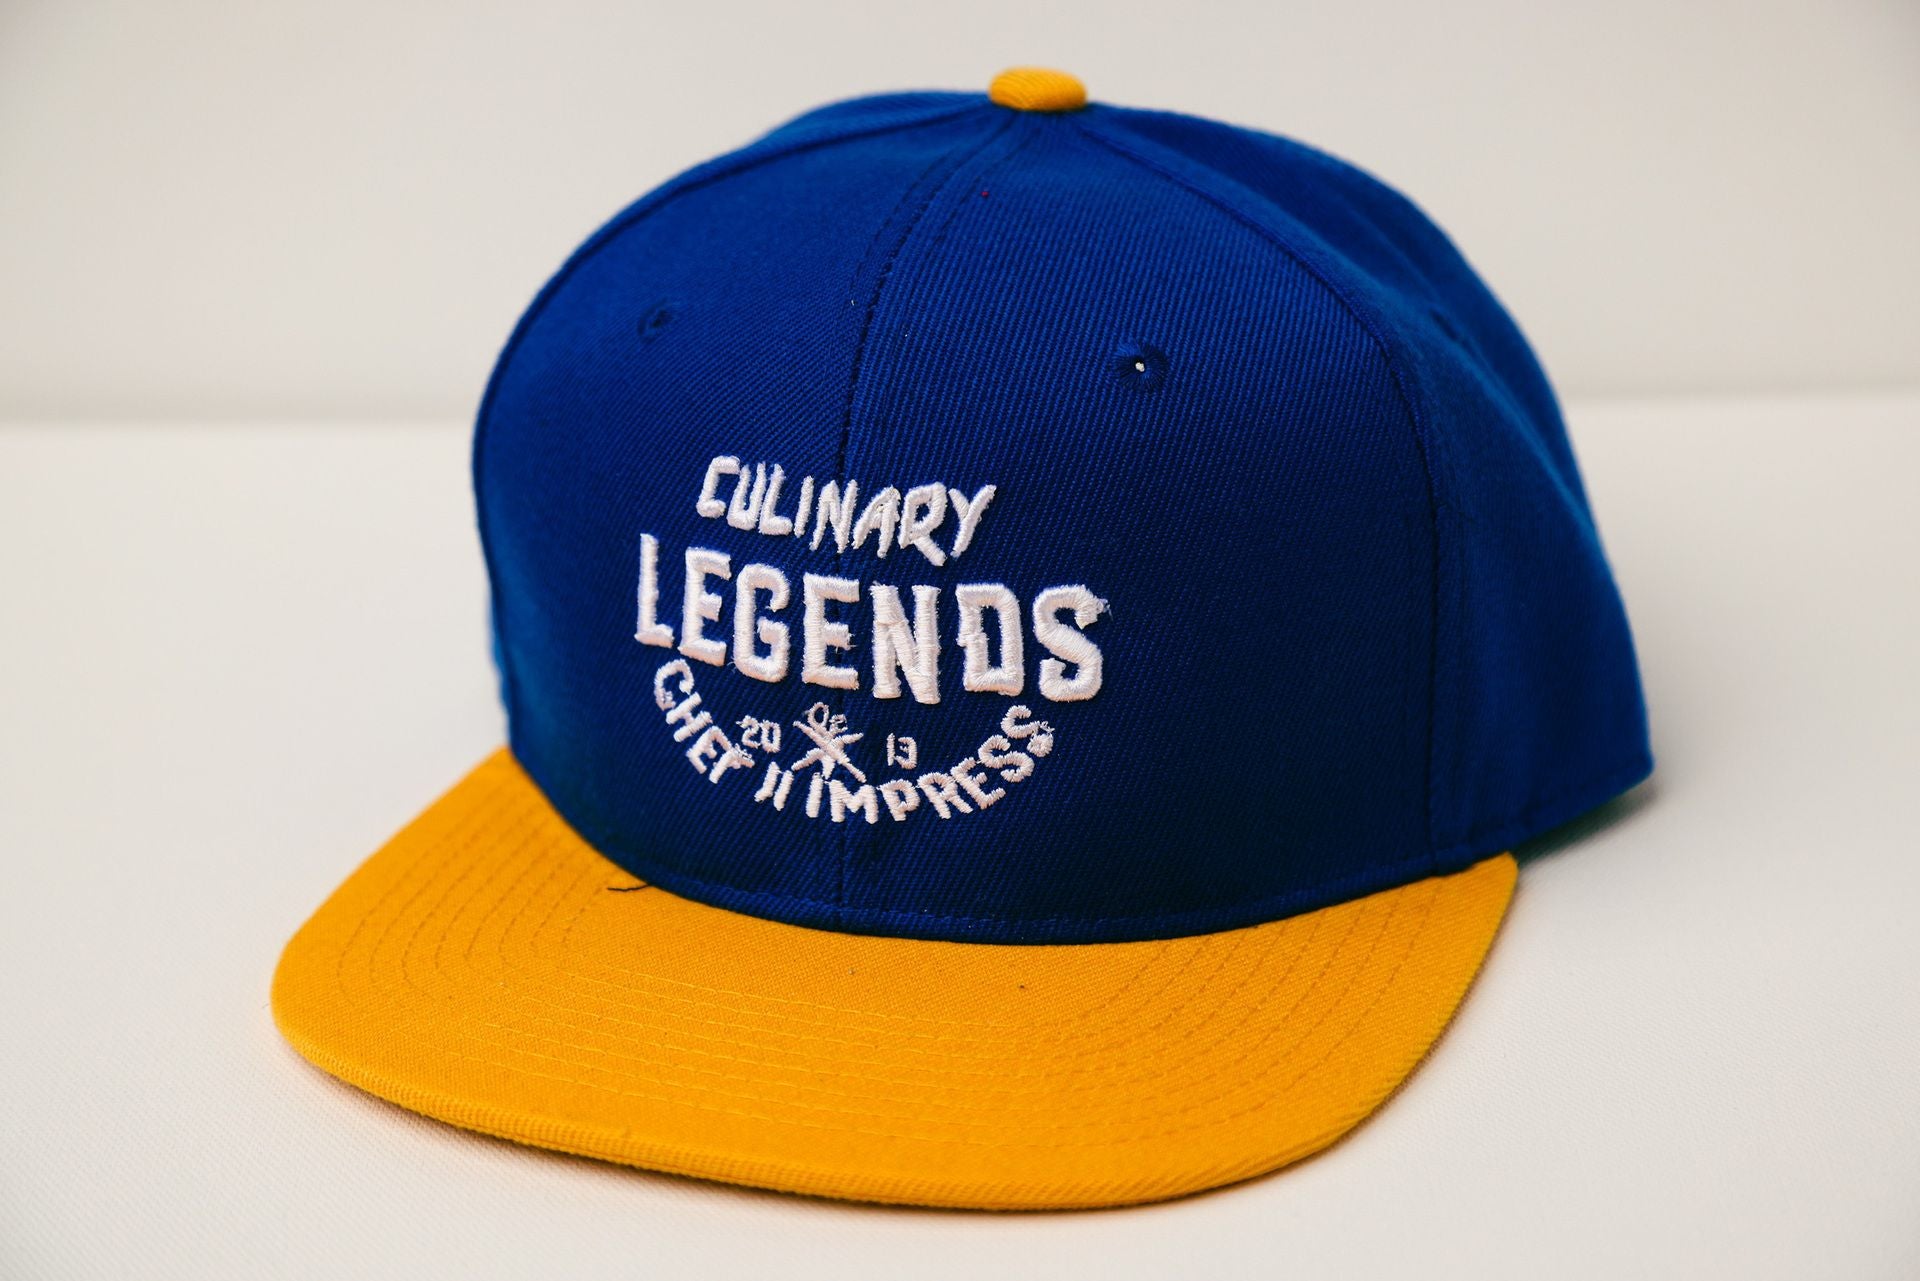 Culinary Legends Hat Blue/Yellow